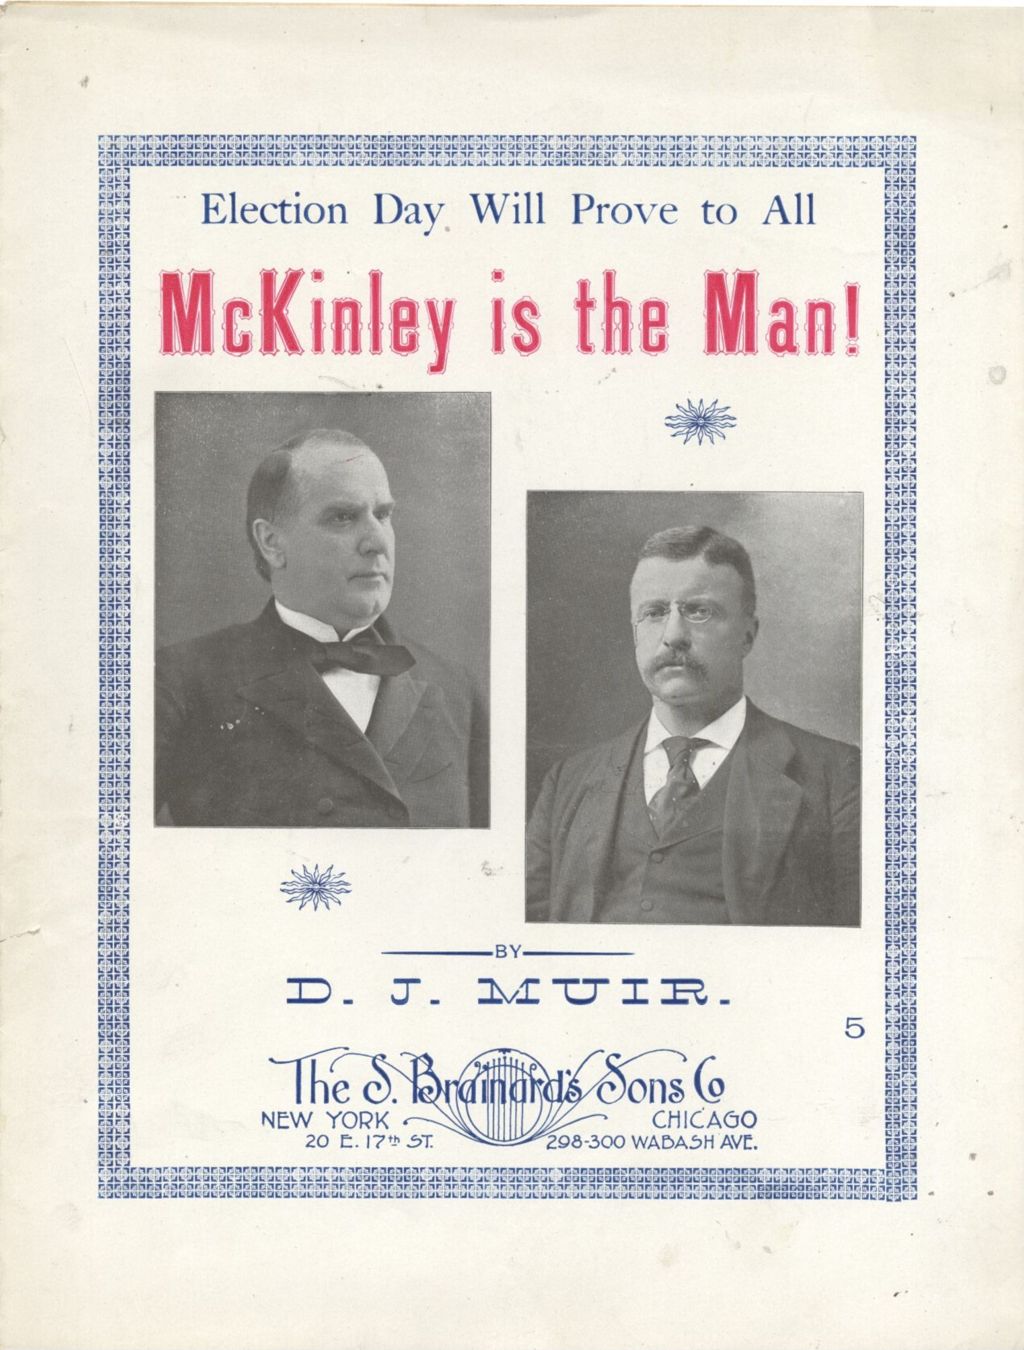 Miniature of Election Day Will Prove to All McKinley is the Man!